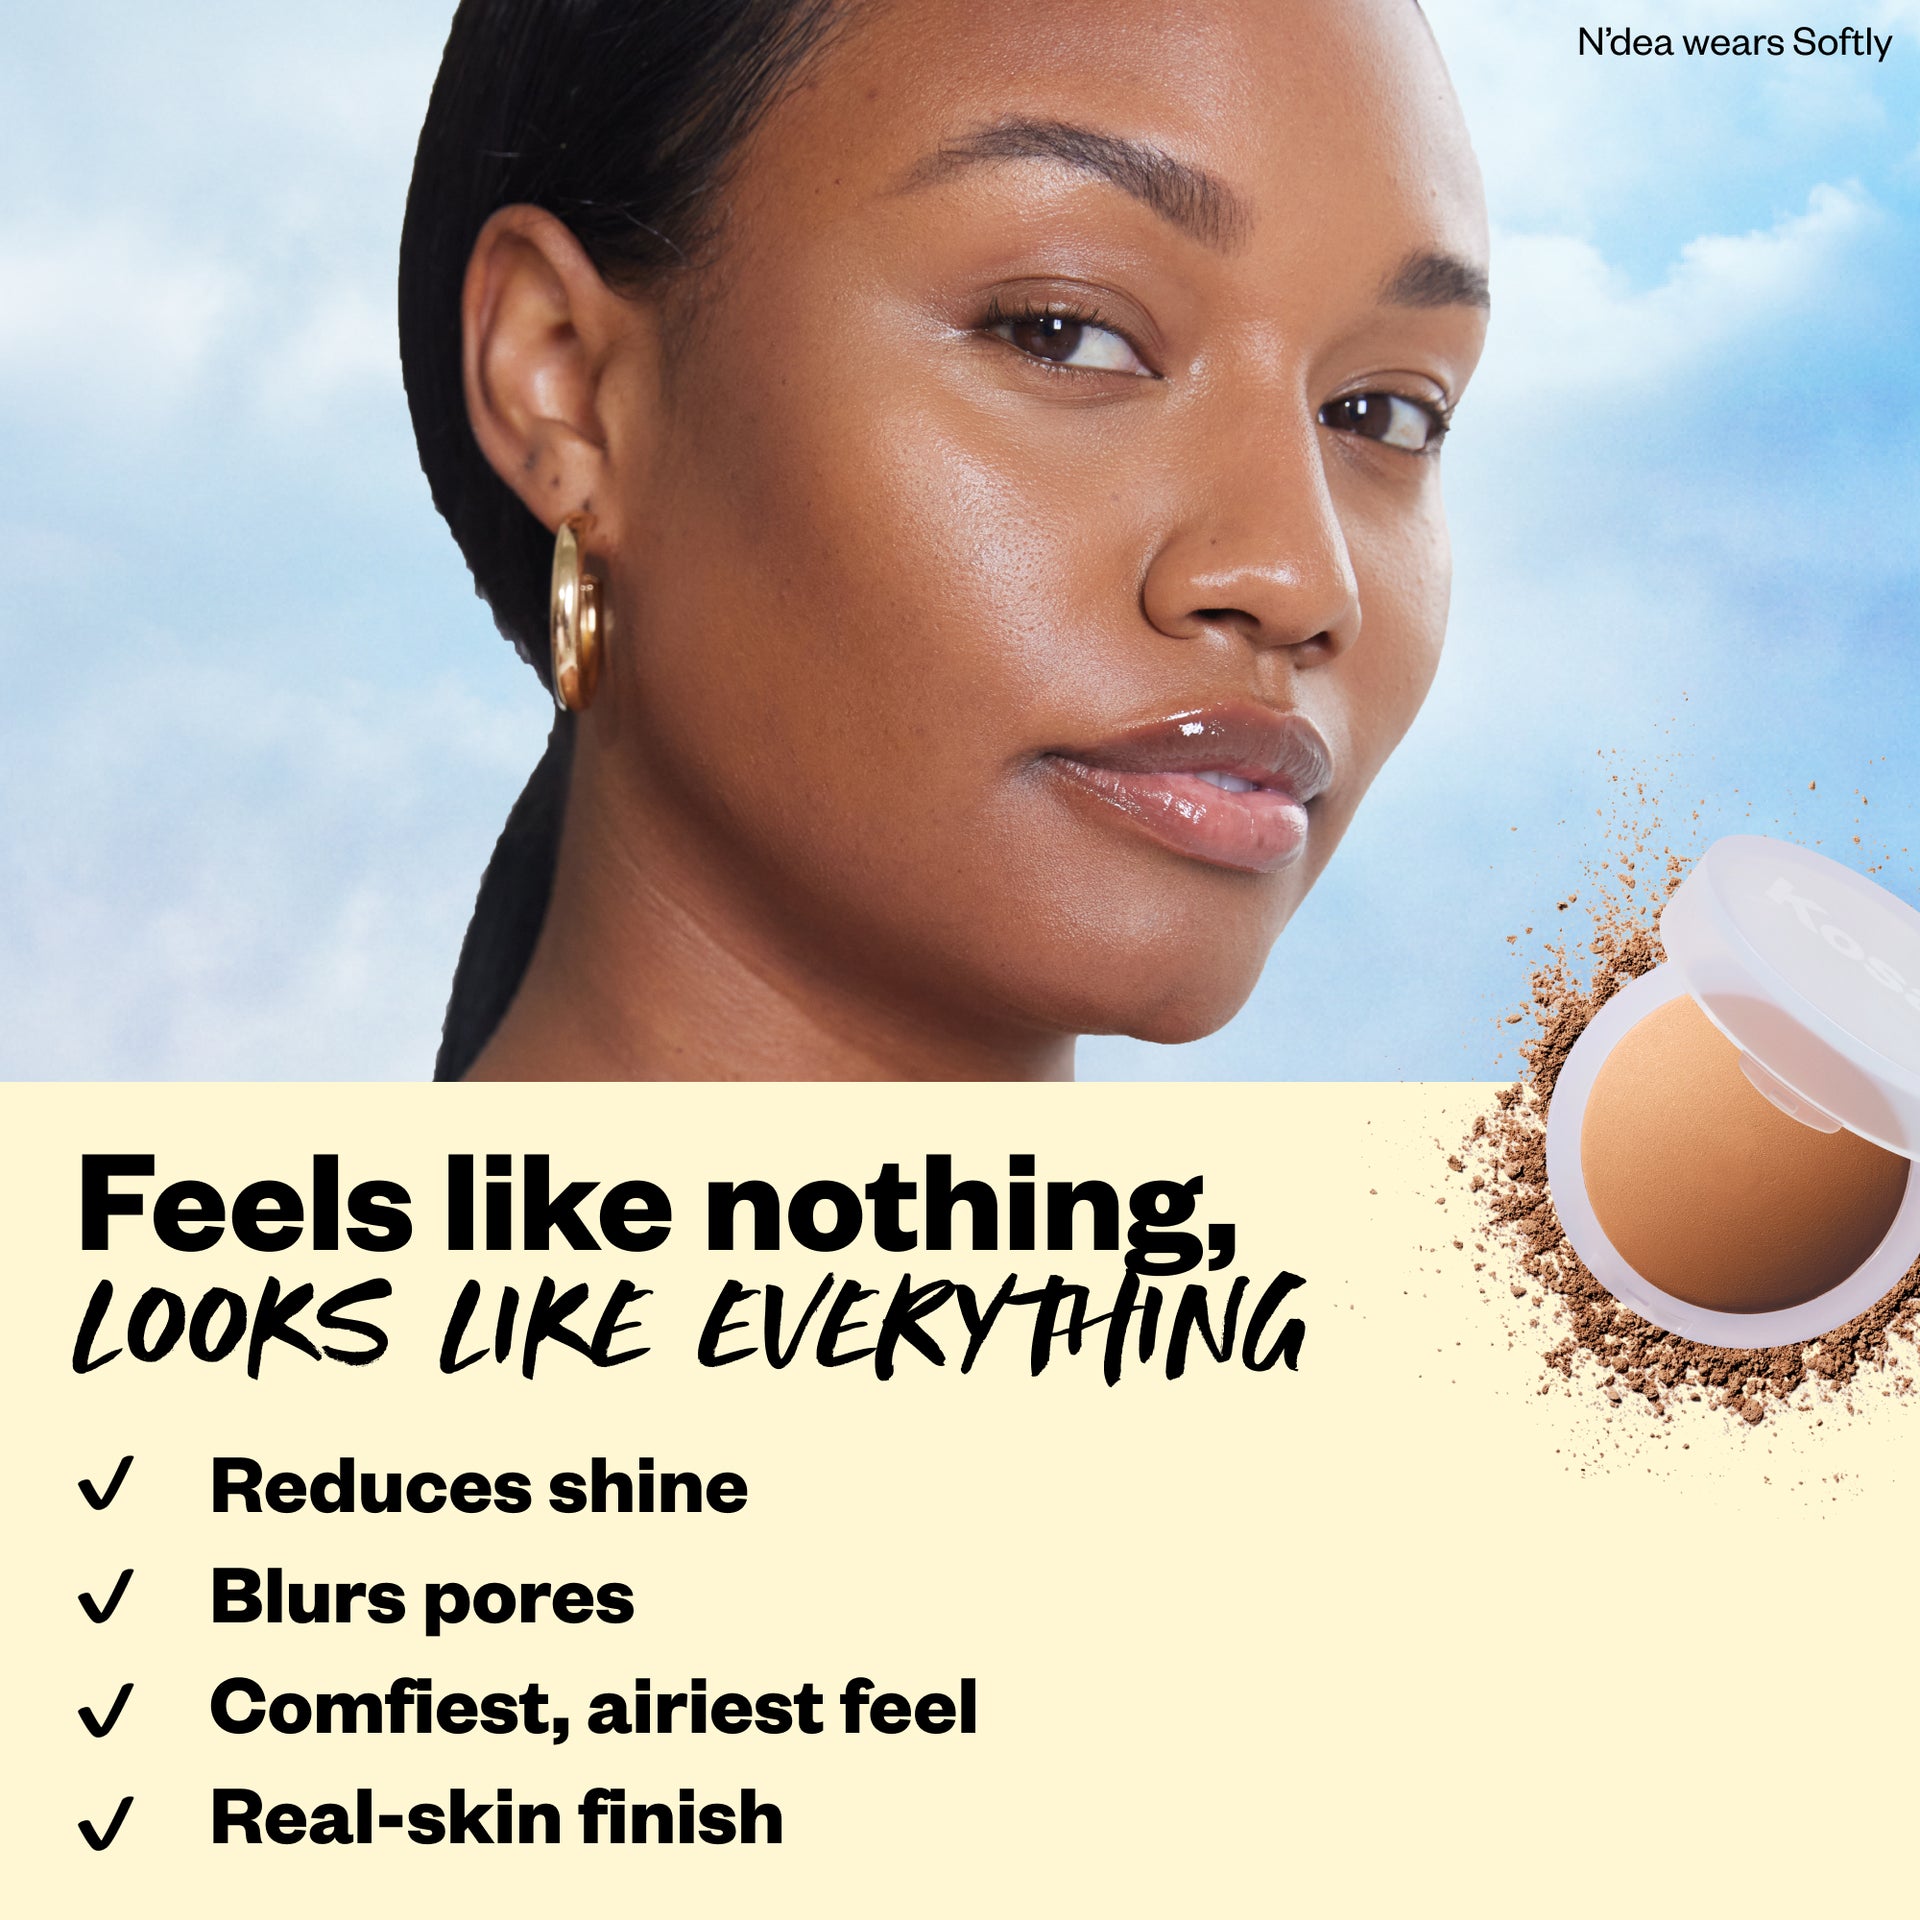 Feels like nothing looks like everything - reduces shine, blurs pores,  comfiest airiest feel, real-skin finish